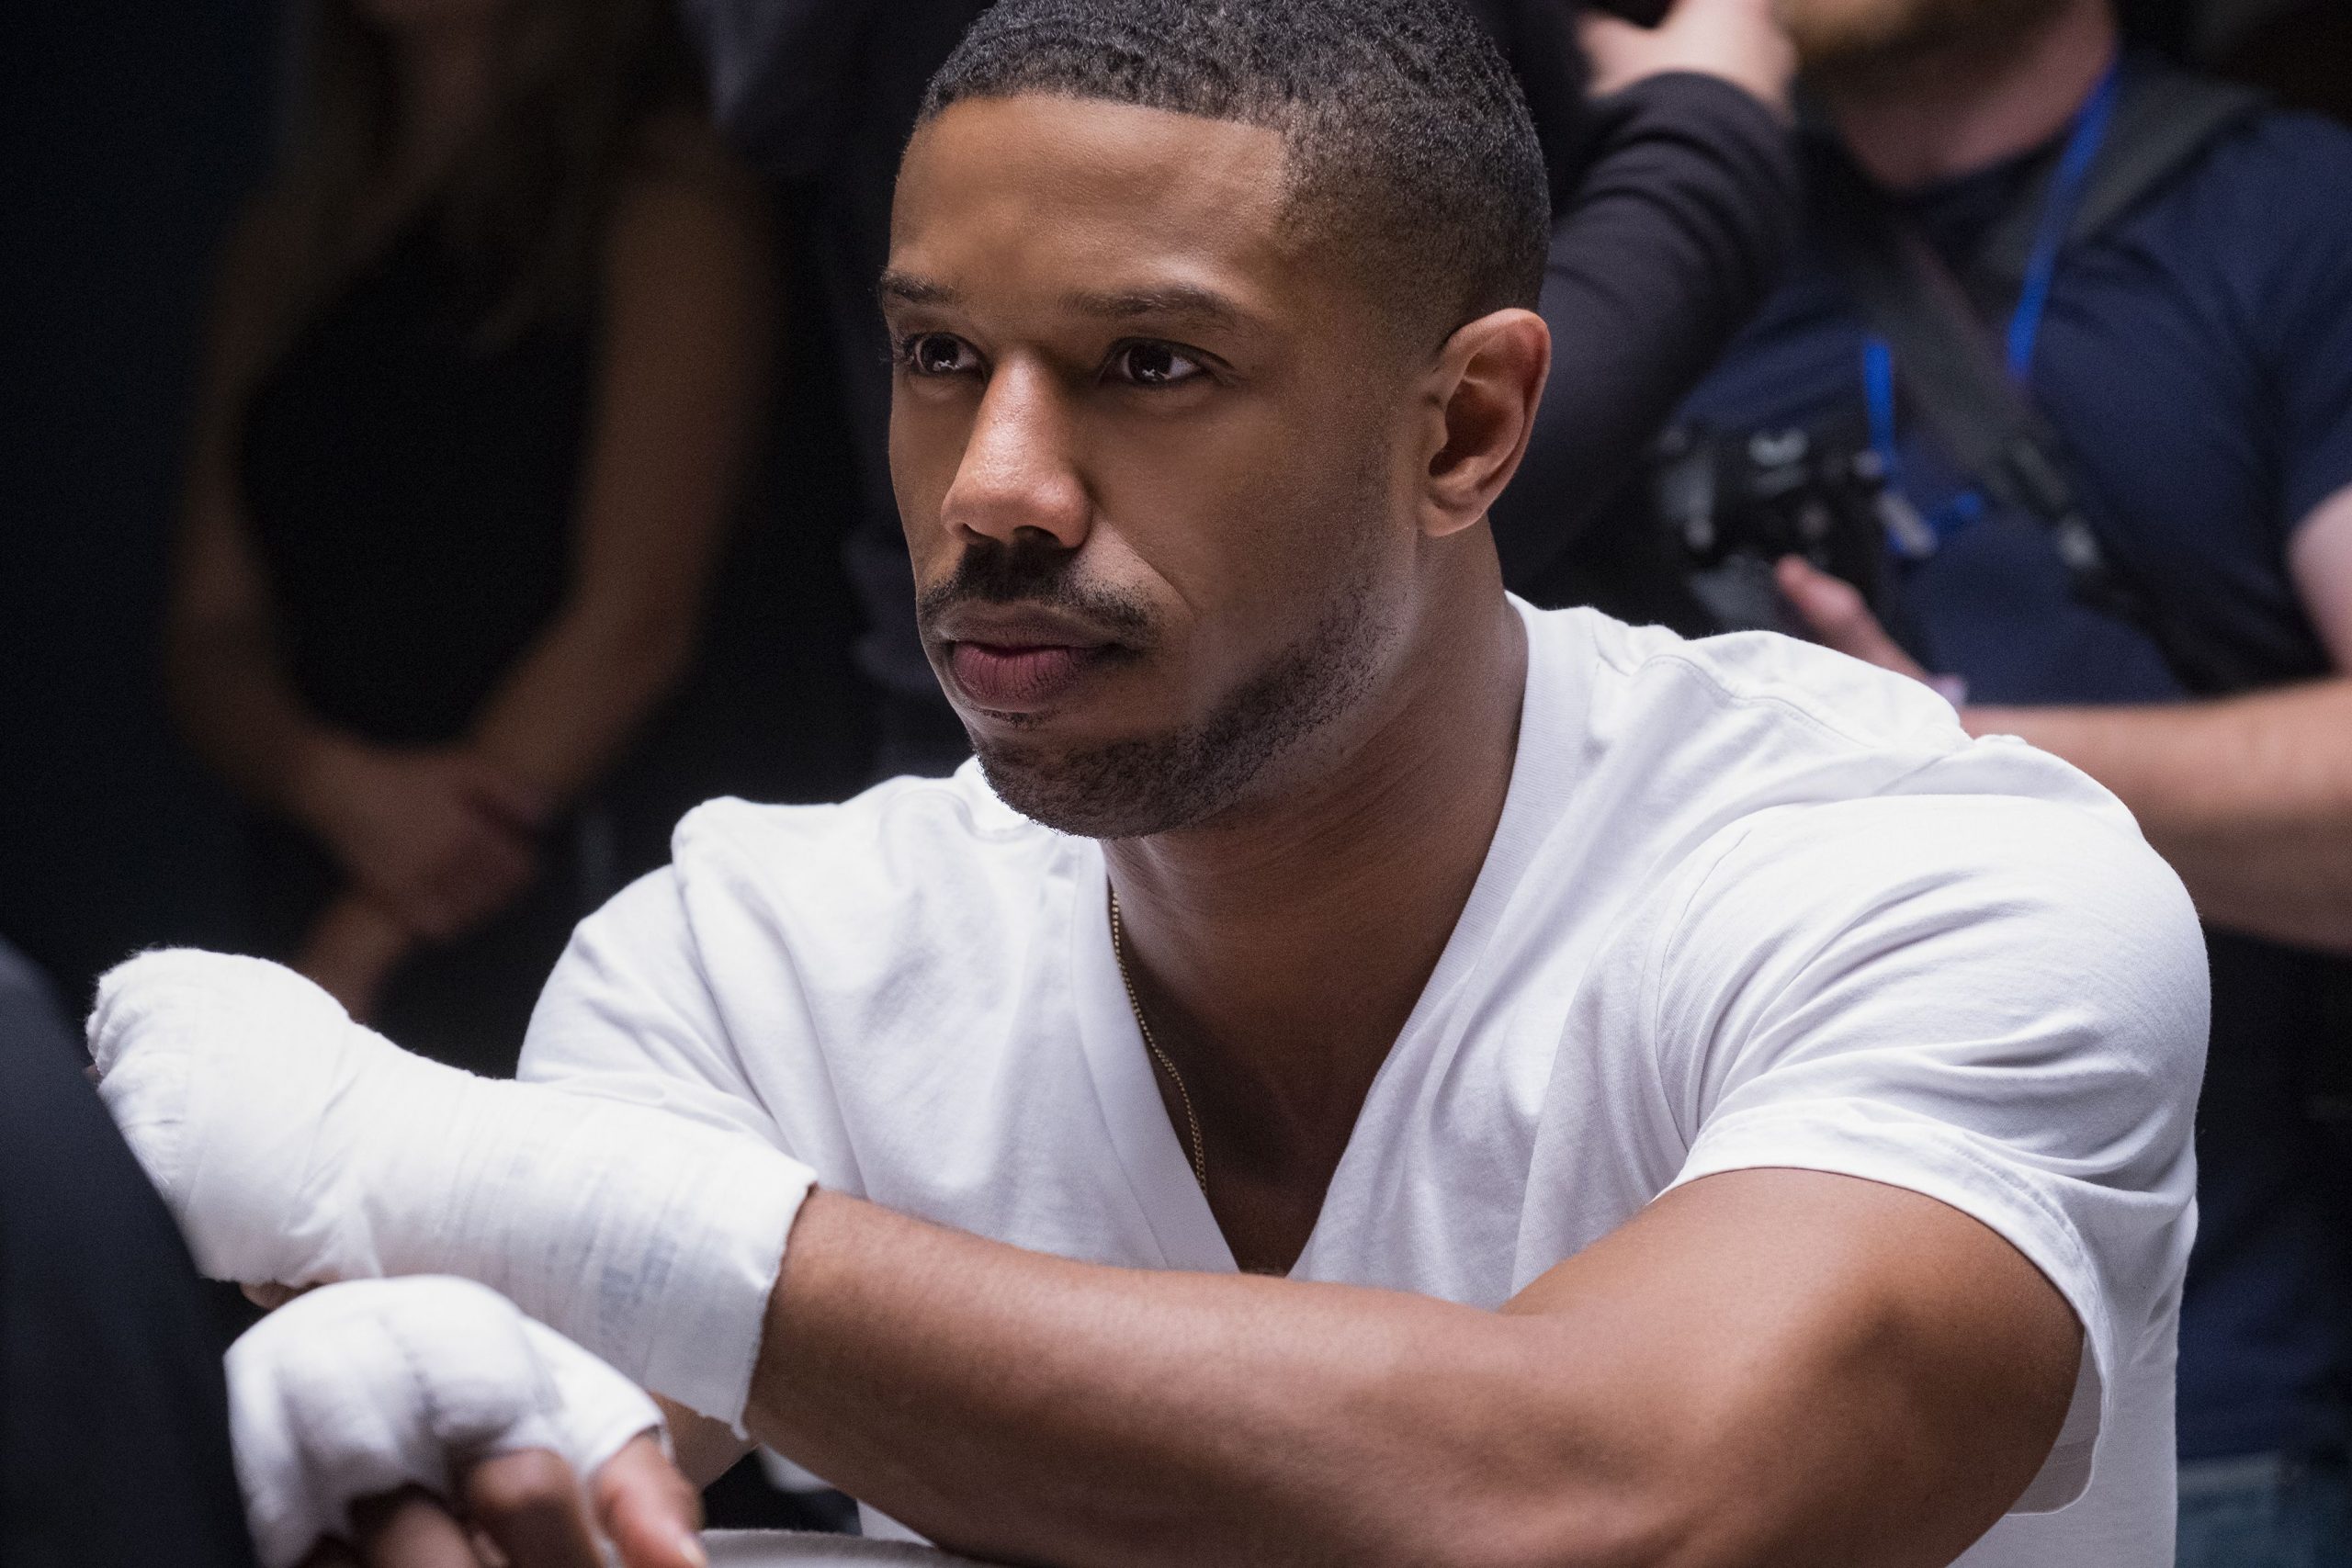 Creed 3 Clinches King Richard Writer — What’s Next For Adonis Creed?